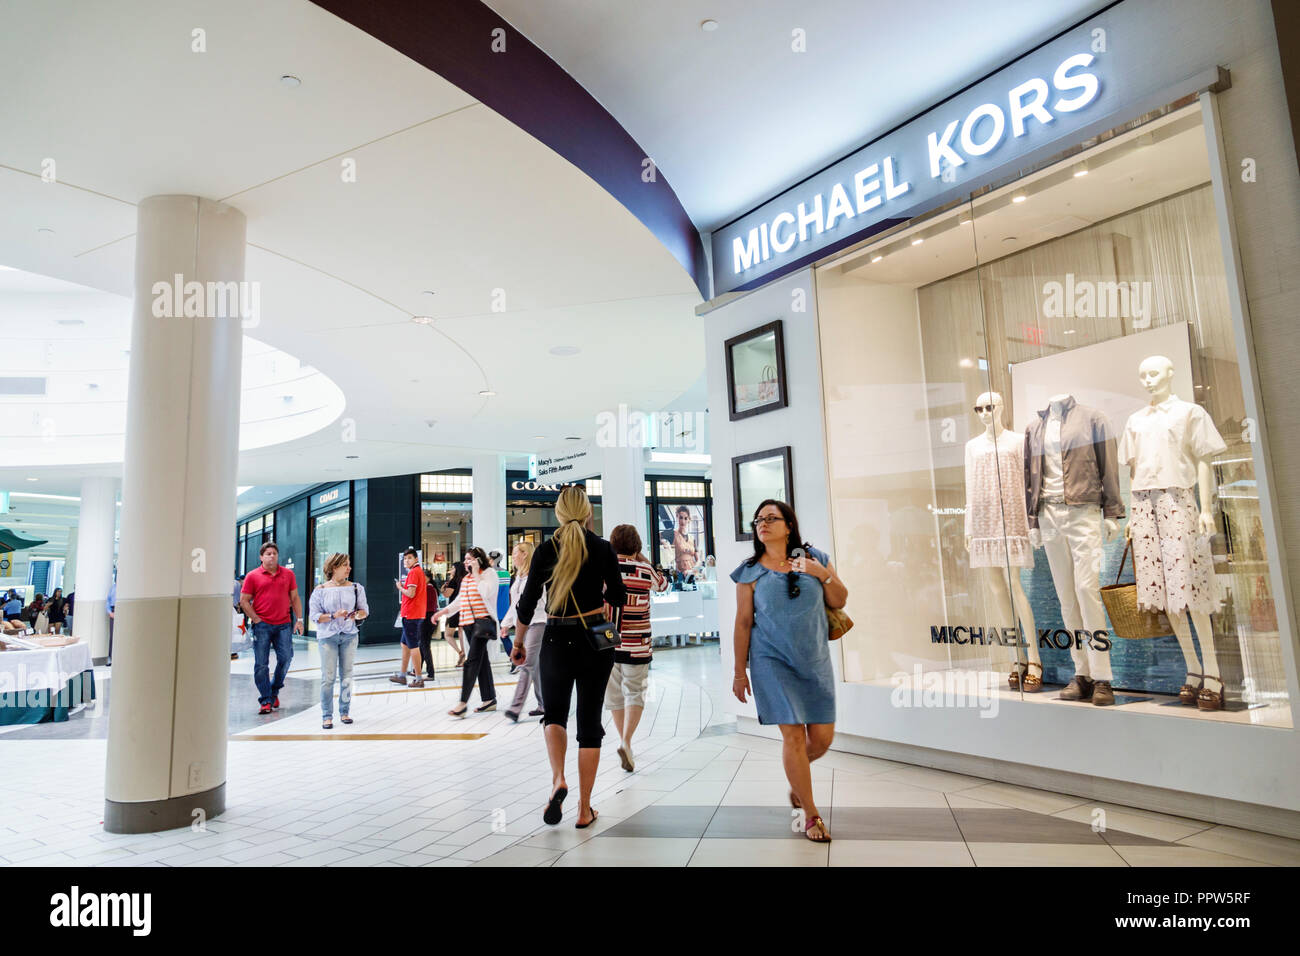 michael kors clothing outlet